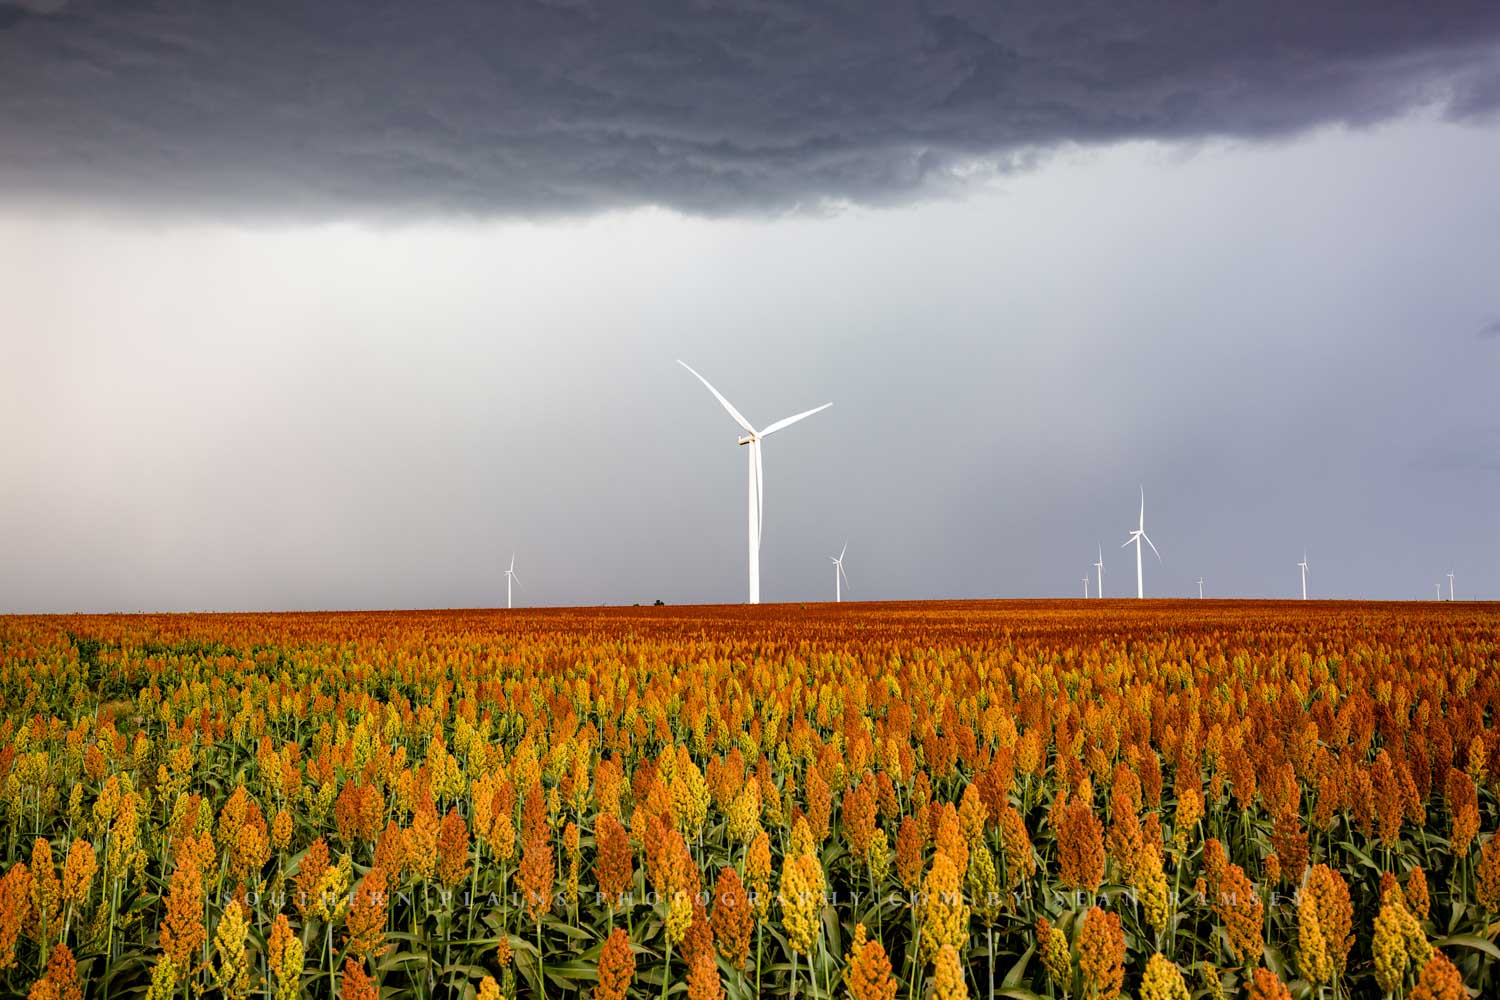 Wind turbines churn in a colorful maize field on a stormy autumn day in Kansas.